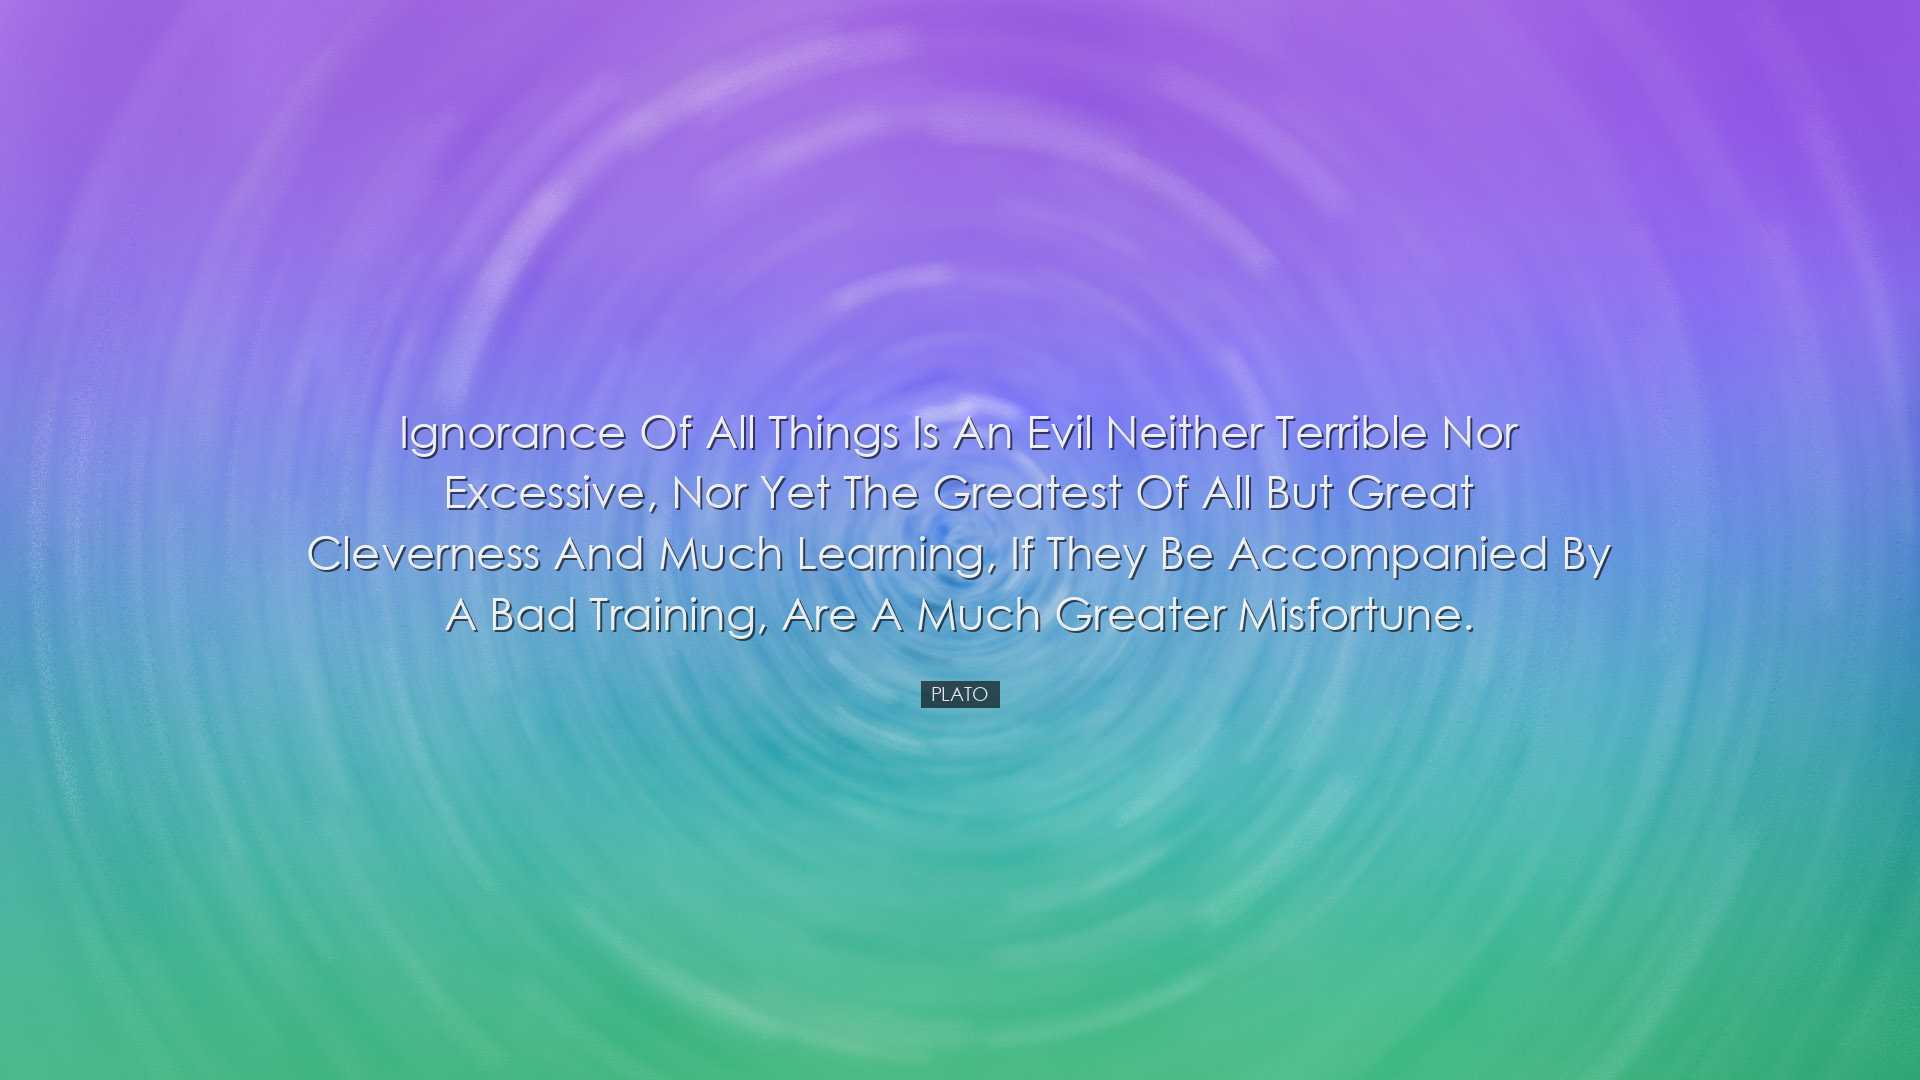 Ignorance of all things is an evil neither terrible nor excessive,